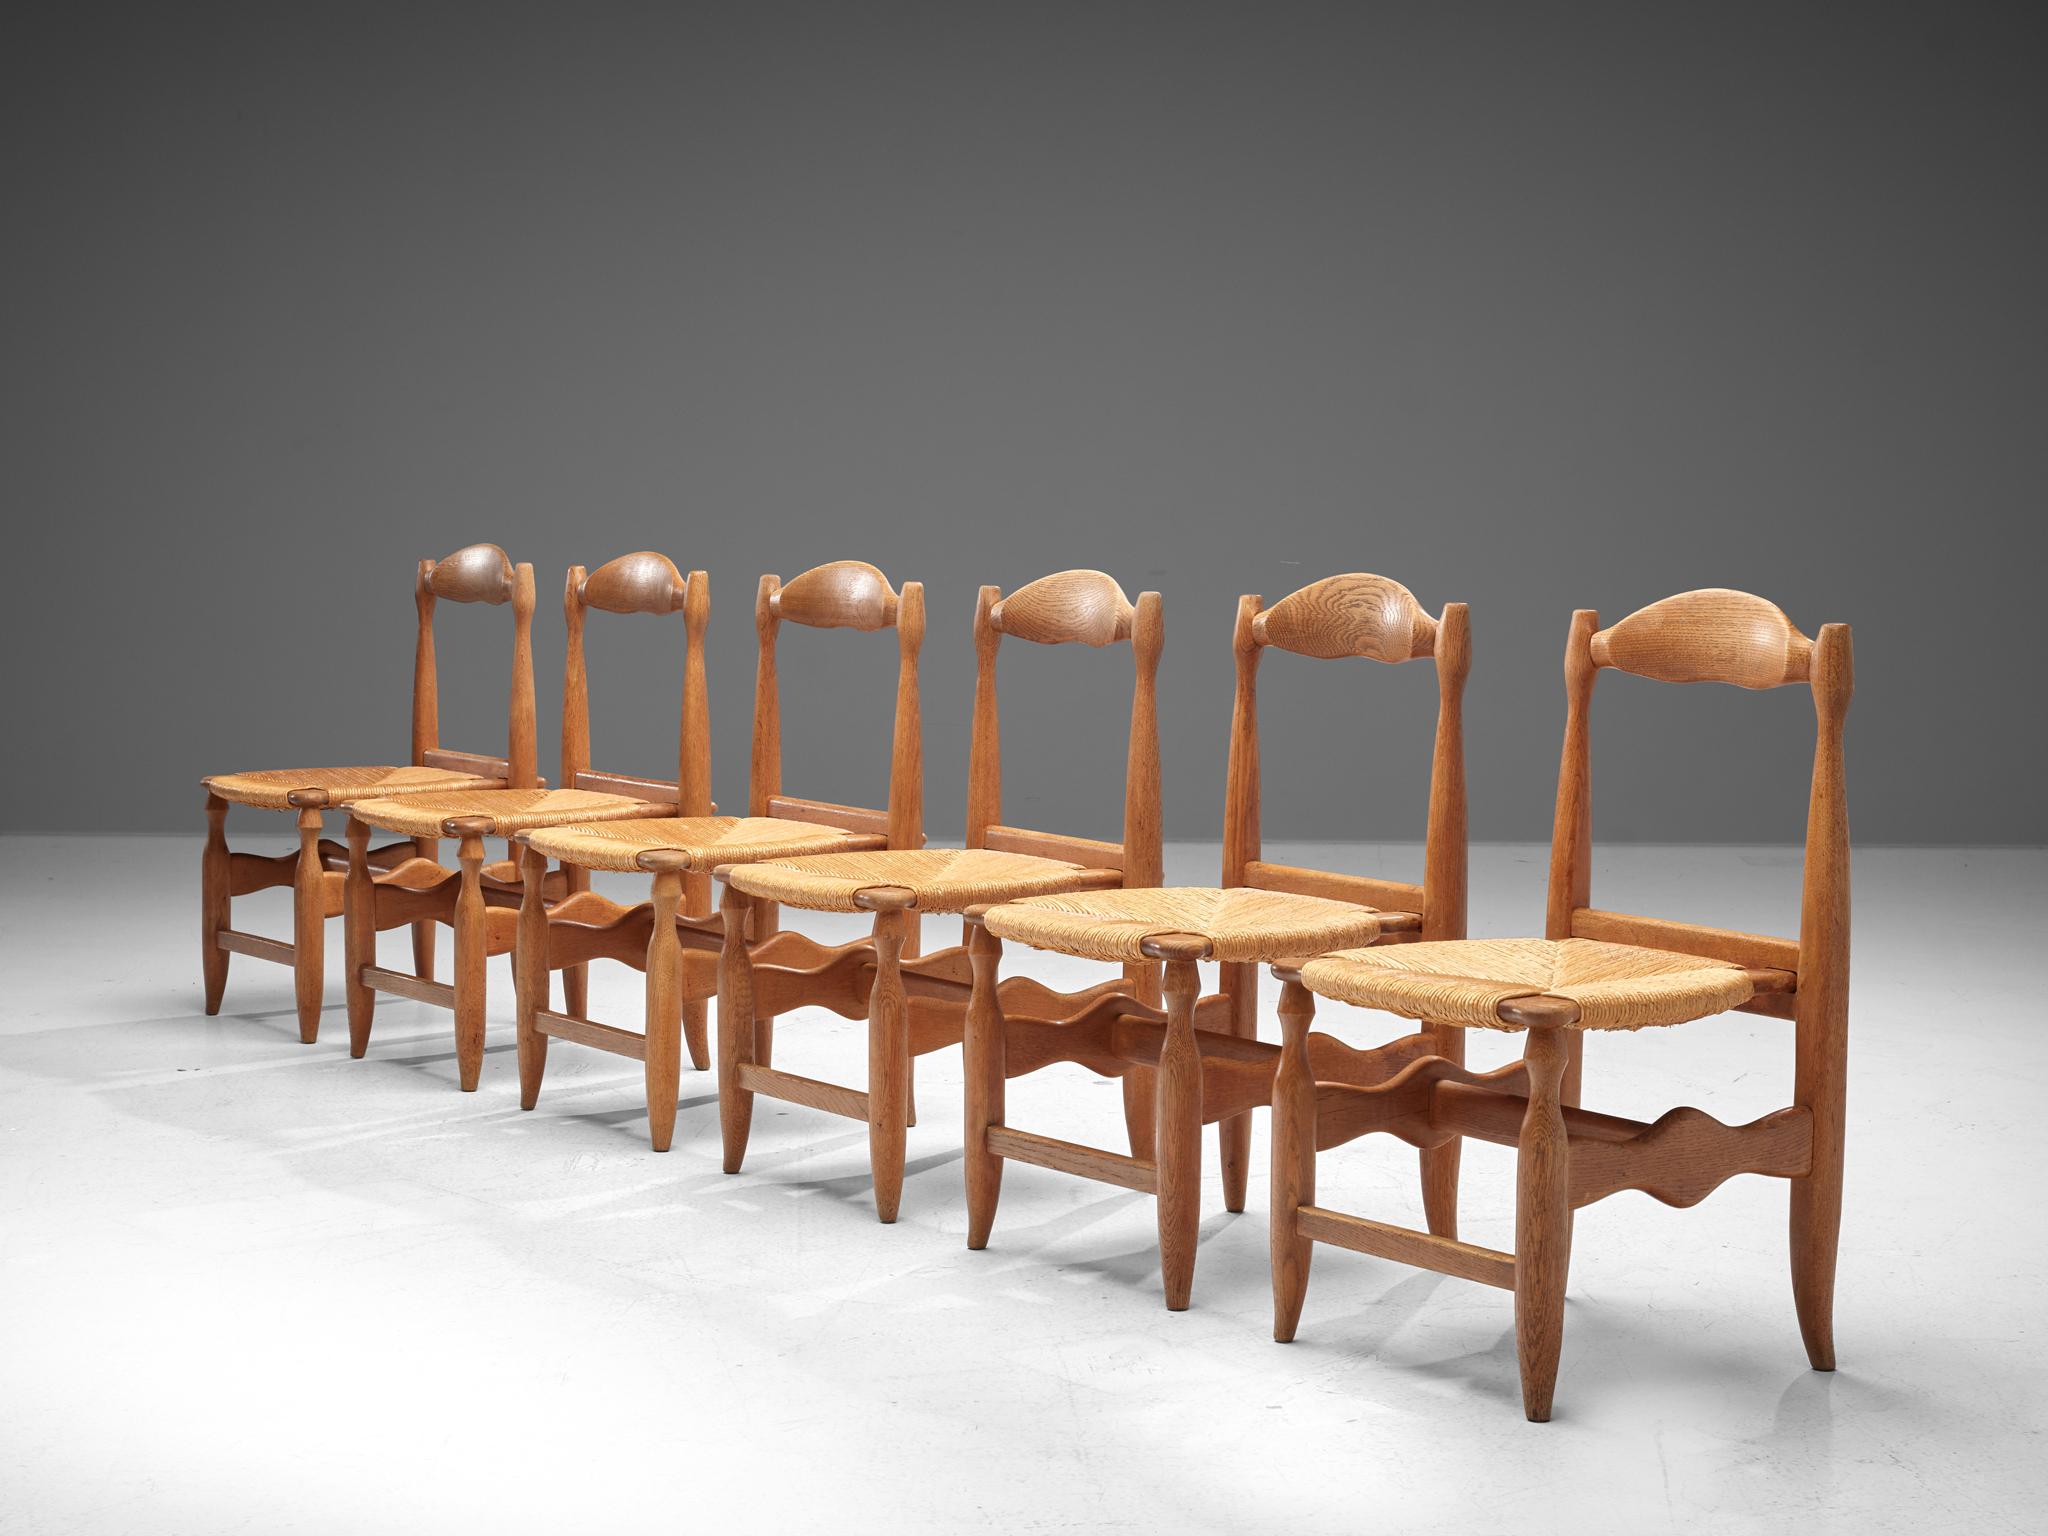 Guillerme & Chambron for Votre Maison, set of six dining chairs, oak, cane, France, 1960s

Set of six elegant dining chairs in solid oak by Guillerme and Chambron. These chairs show the characteristic frame of this French designer duo. Tapered